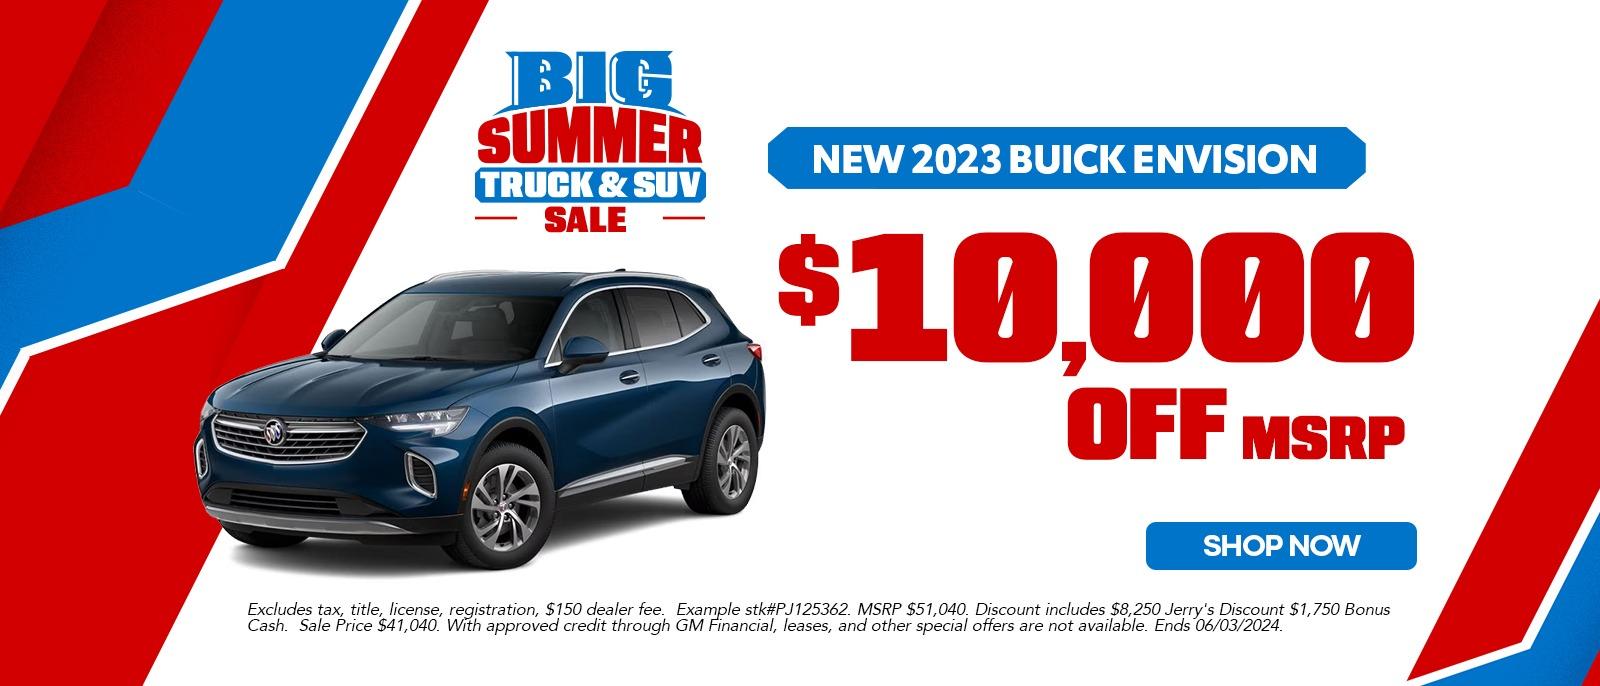 New 2023 Buick Envision Offer in Weatherford